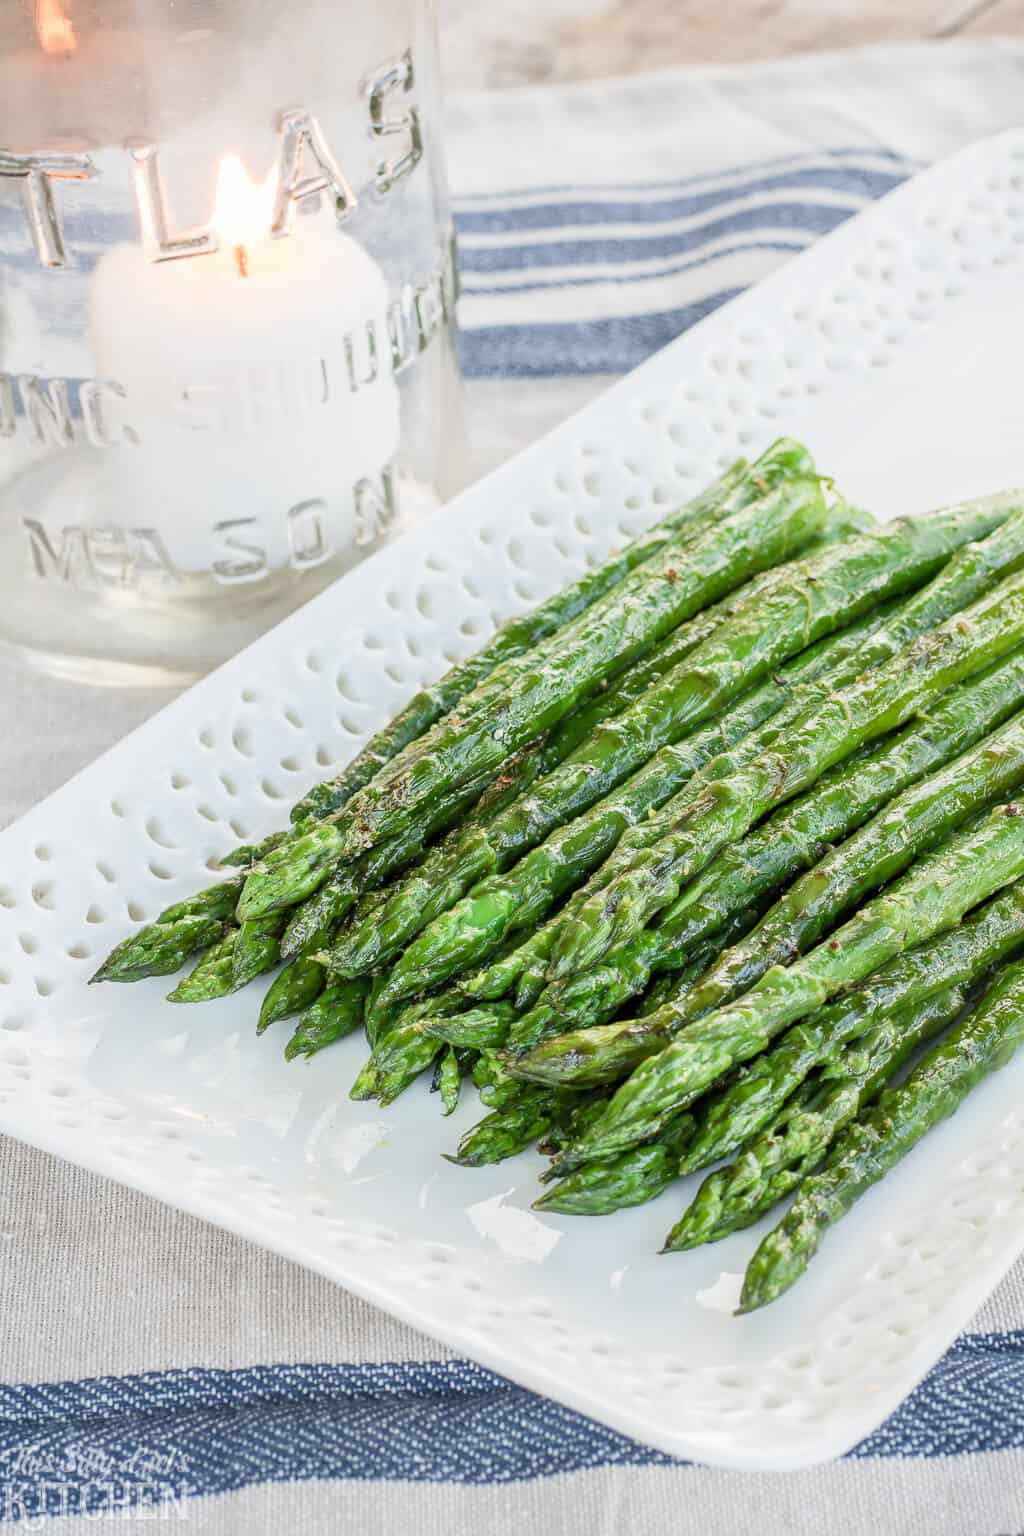 The Best Grilled Asparagus Recipe, made with 5 simple ingredients and ready in under 15 minutes! #Recipe from ThisSillyGirlsKitchen.com #asparagus #grilledasparagus